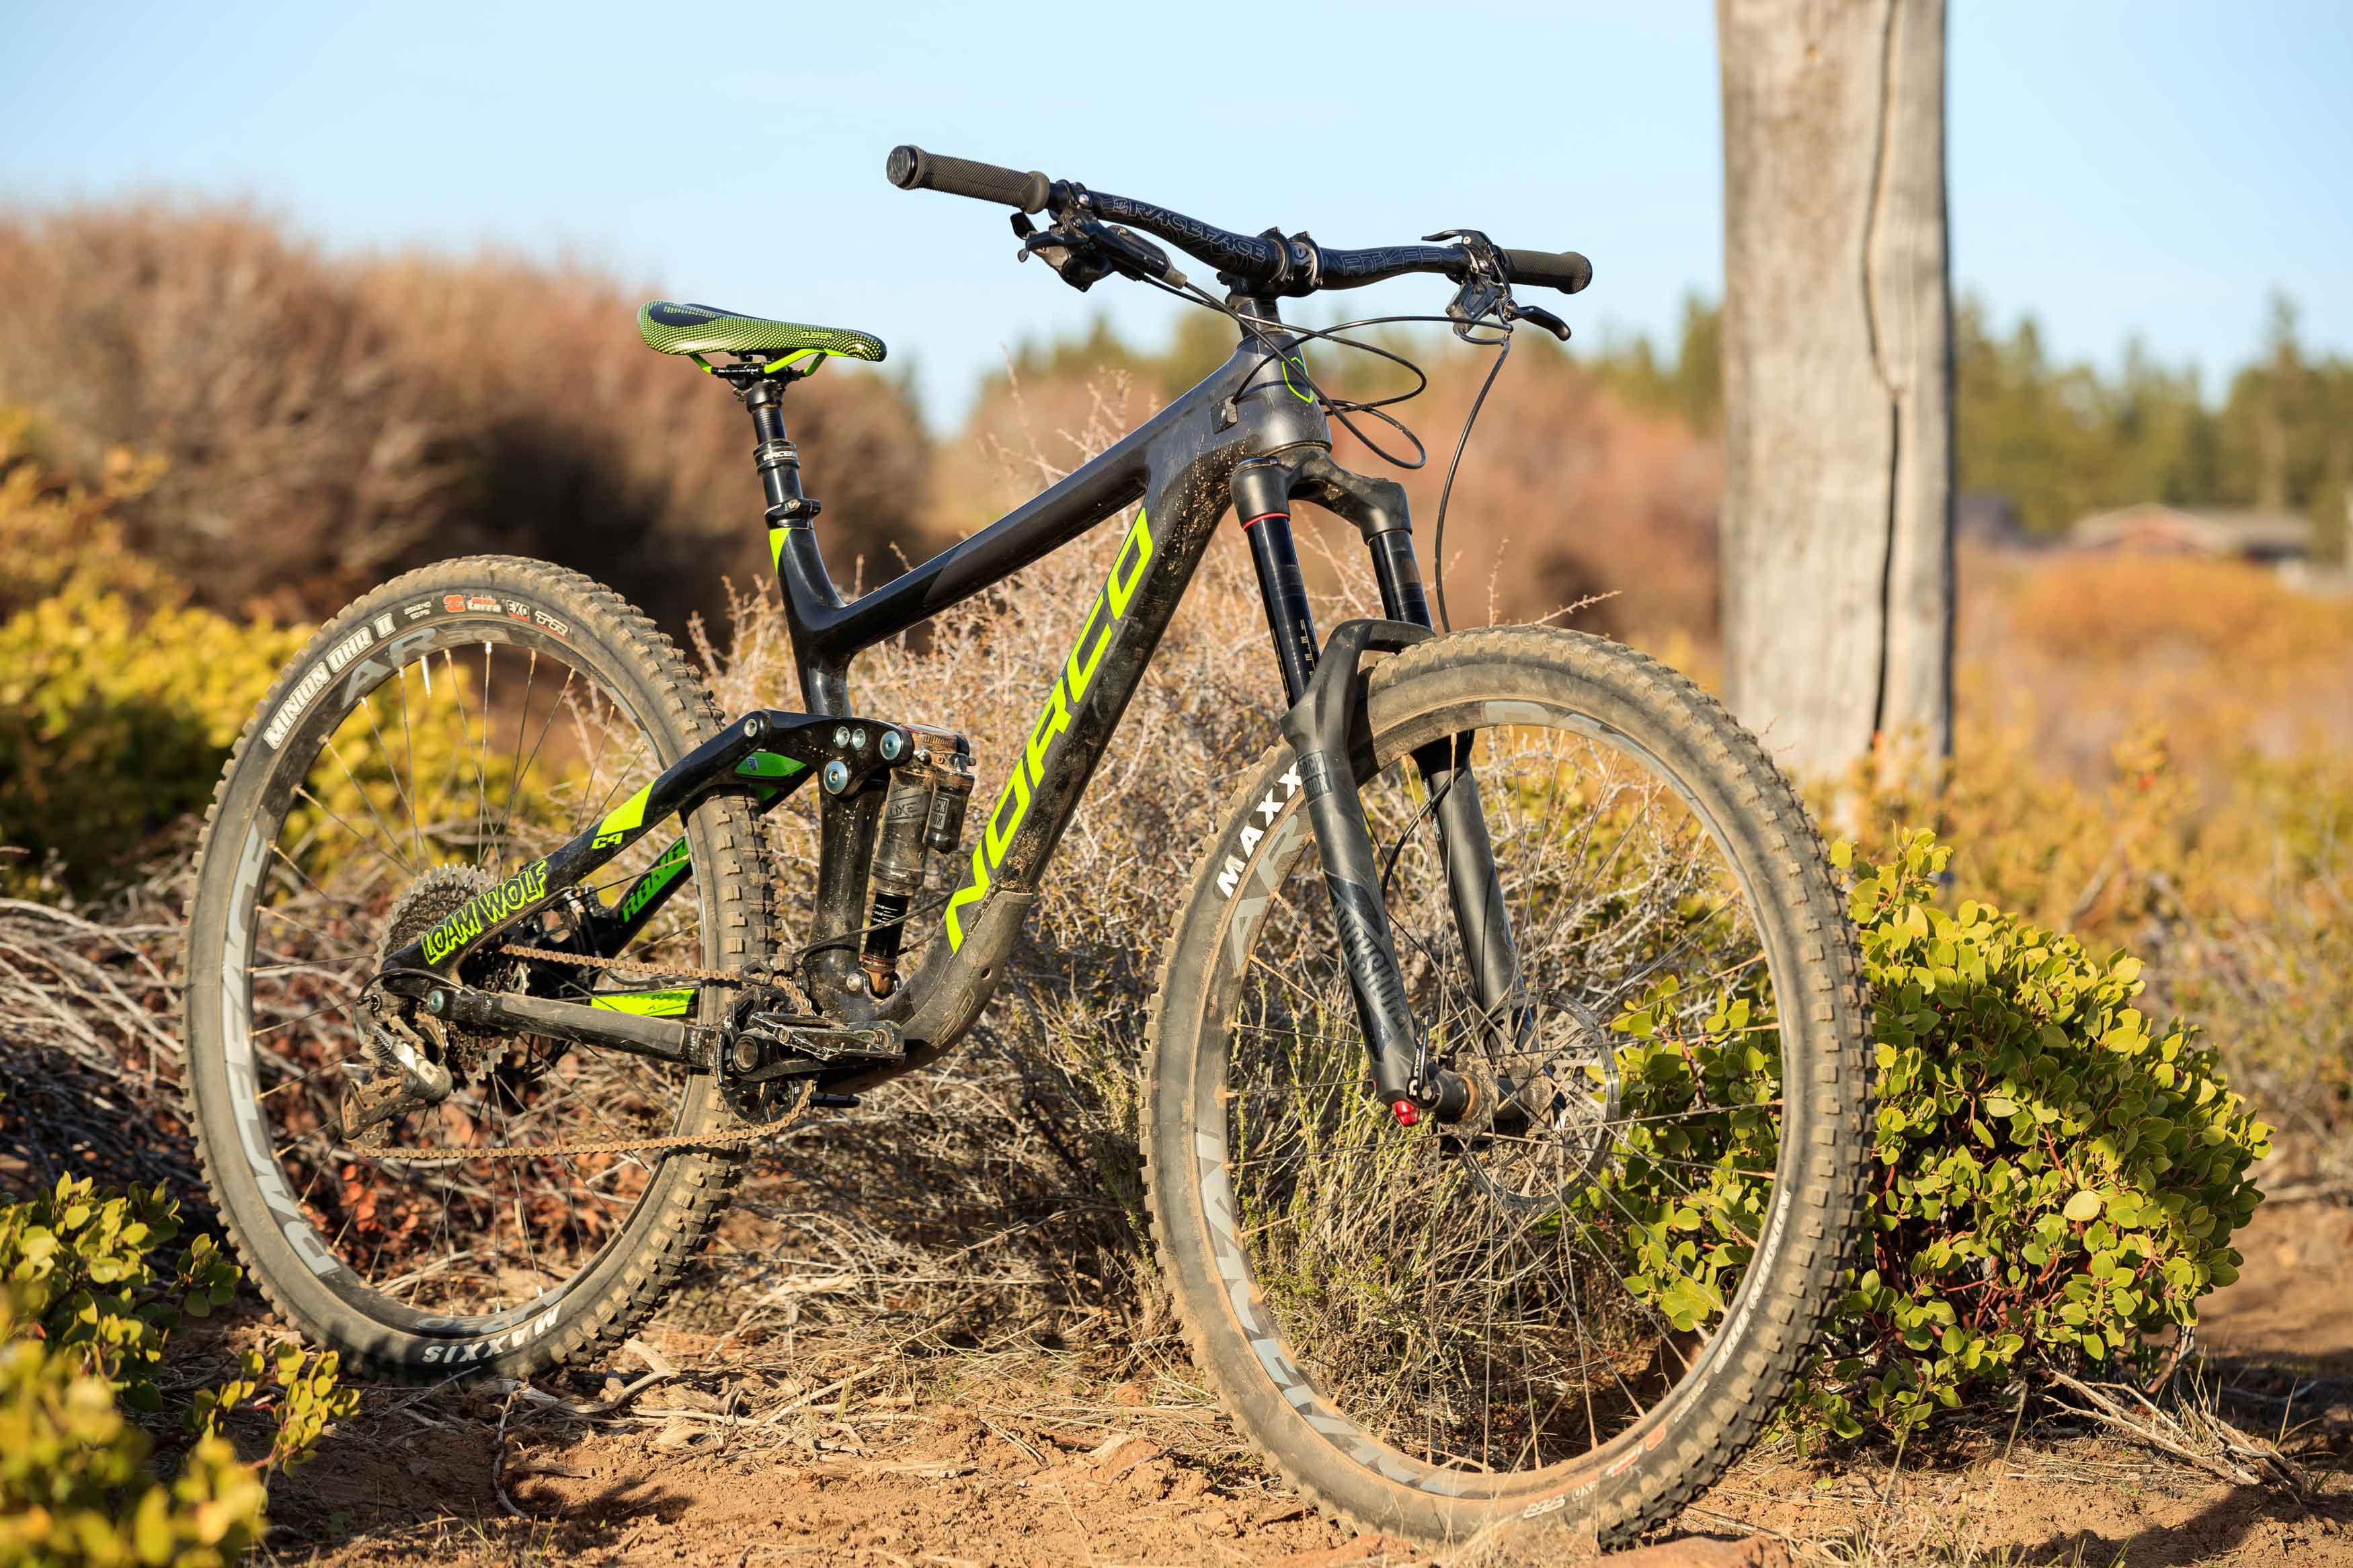 Review: Norco Range C 9.2 - Built for a Beating